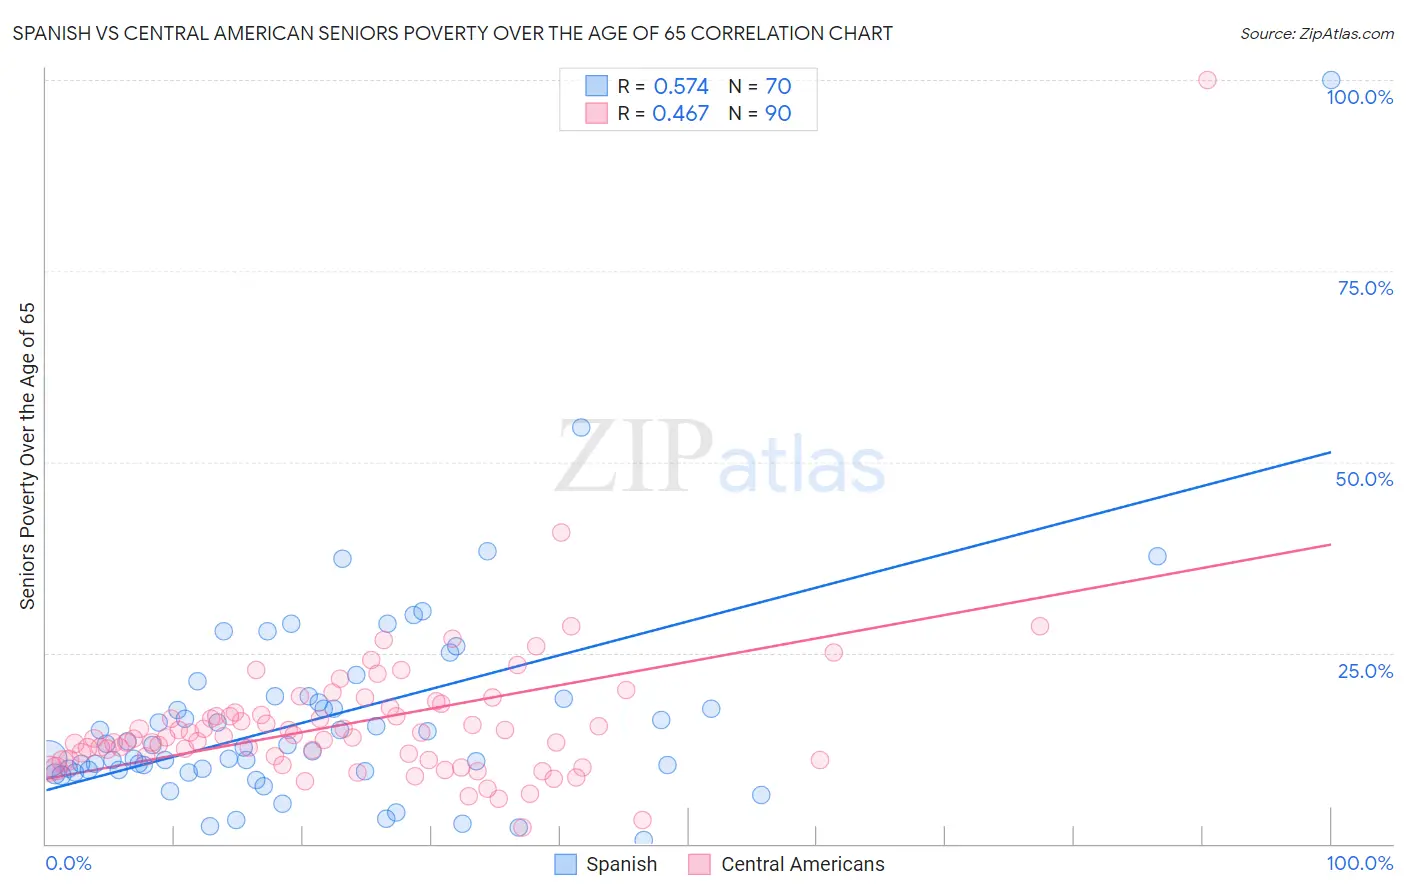 Spanish vs Central American Seniors Poverty Over the Age of 65